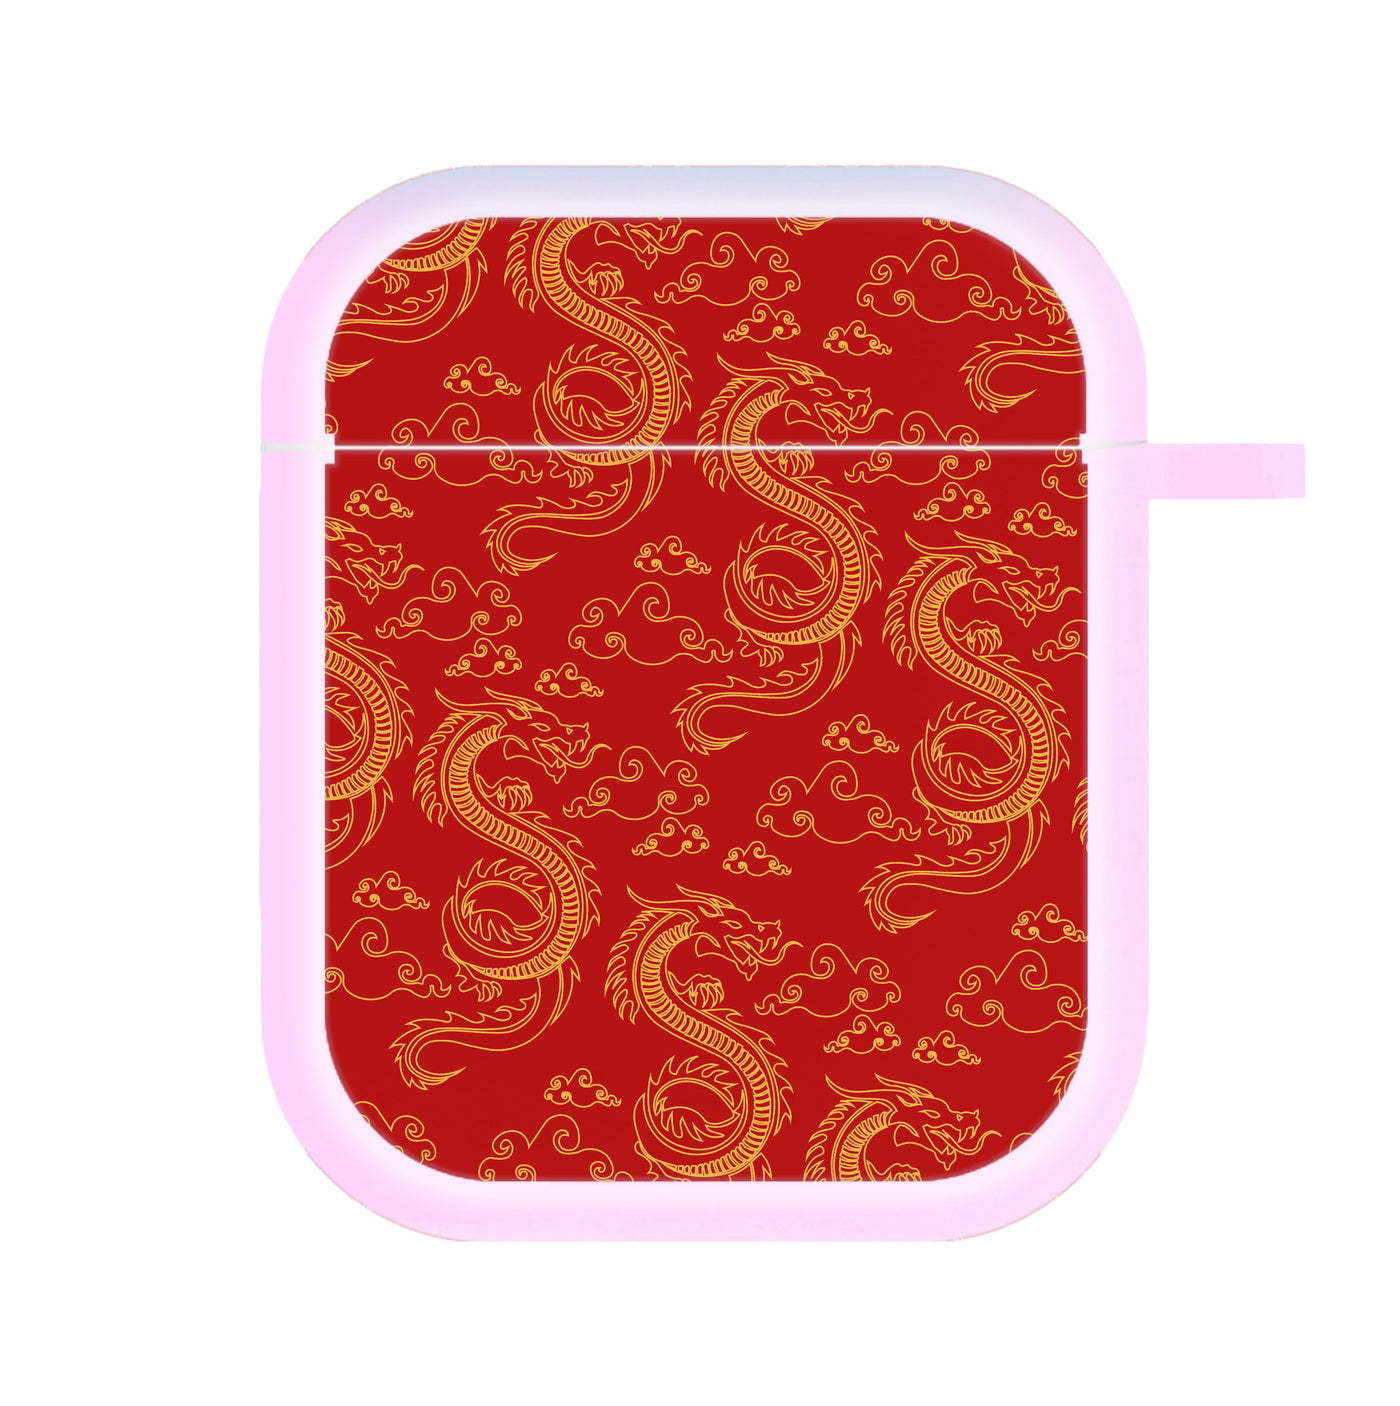 Red And Gold Dragon Pattern AirPods Case